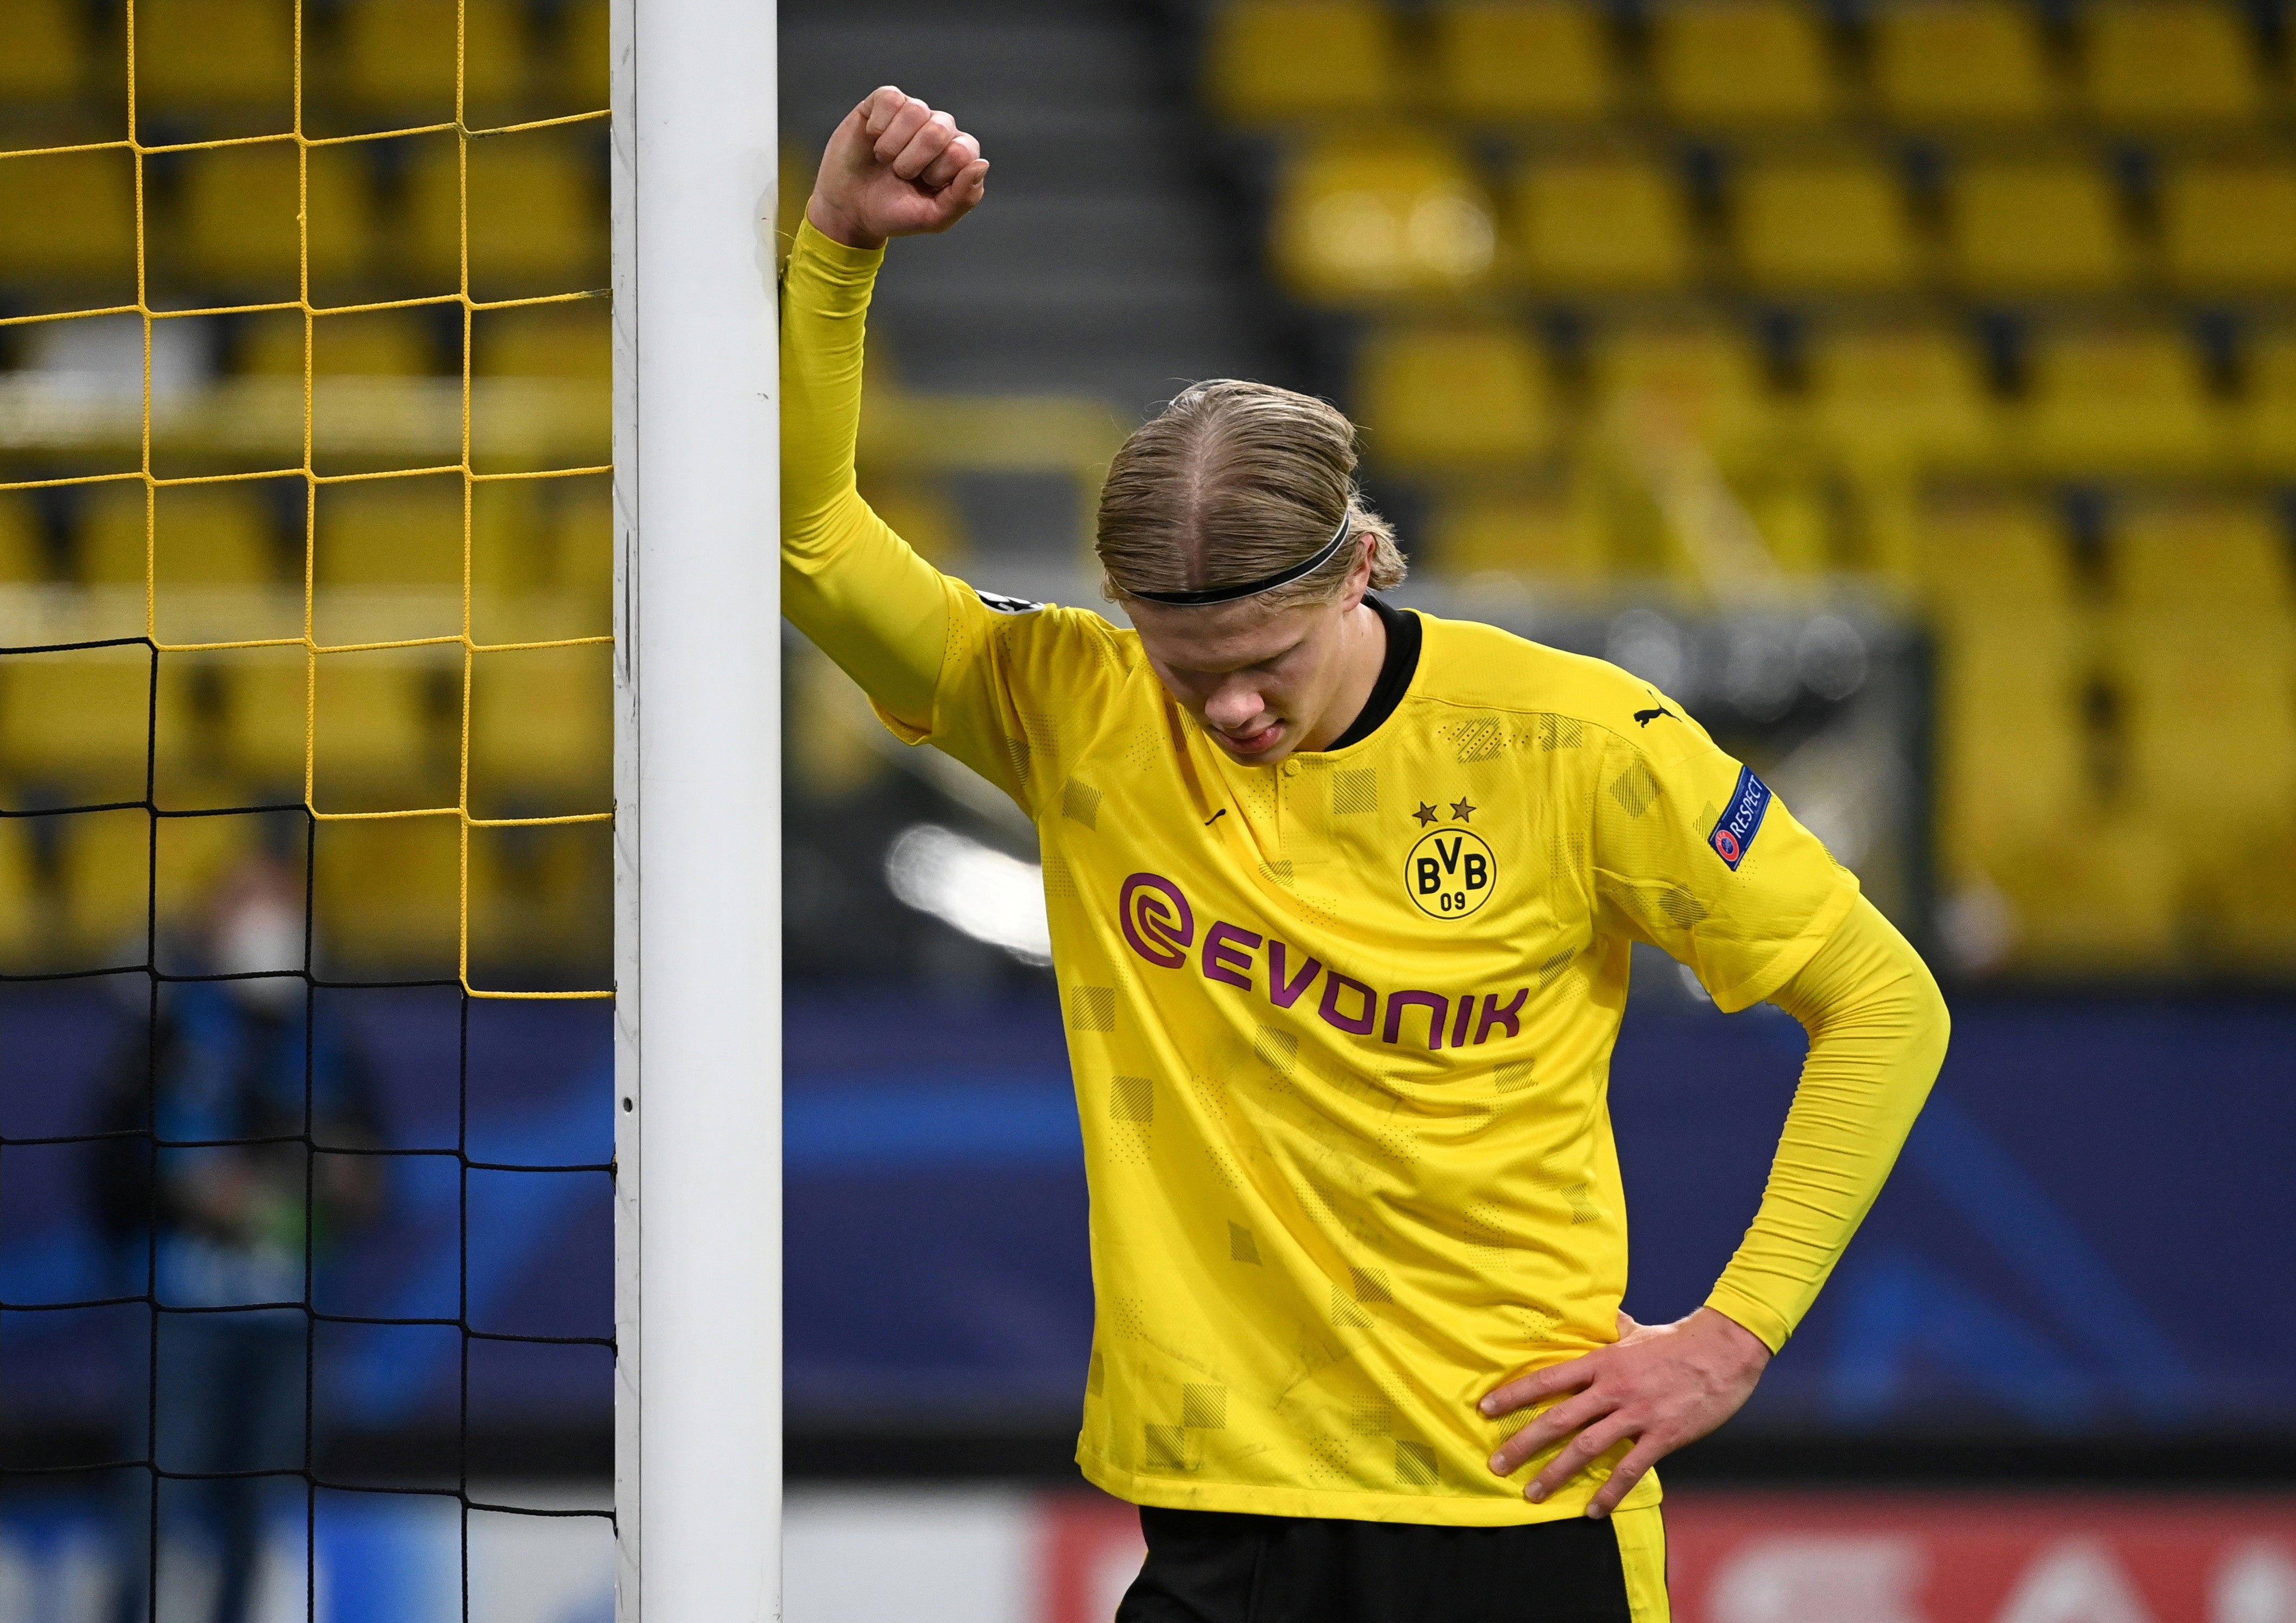 Erling Haaland couldn’t find the net against City